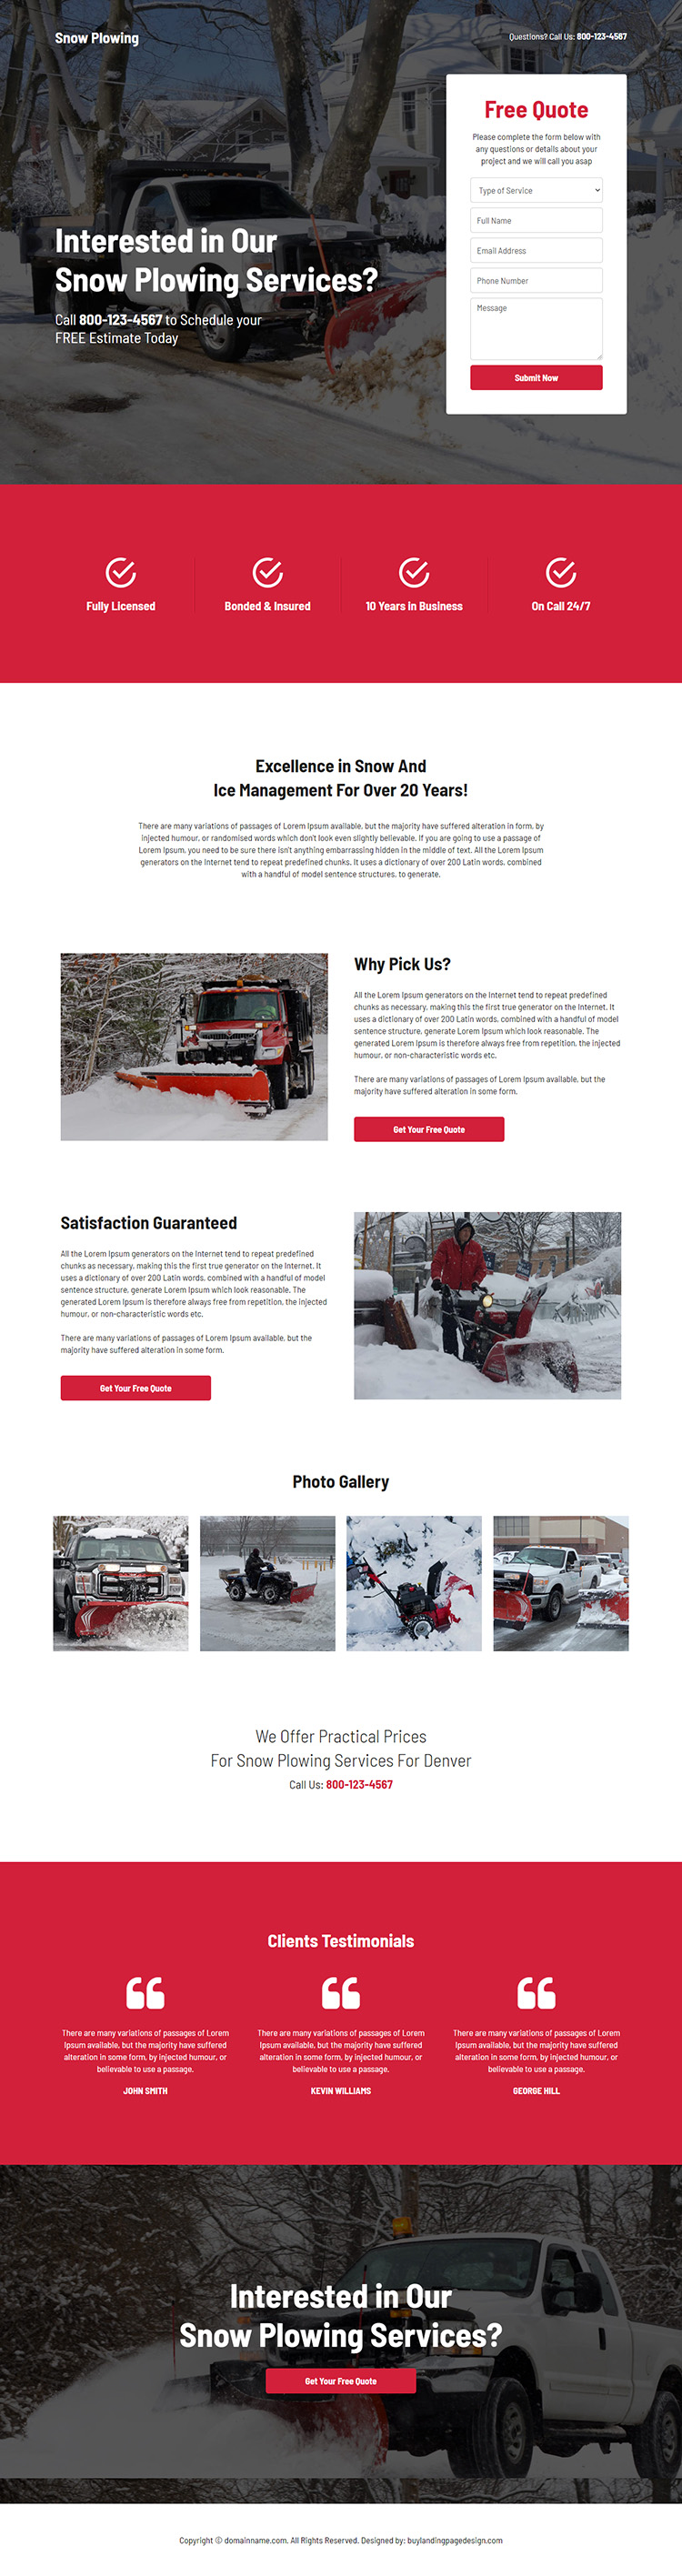 snow removal service responsive landing page